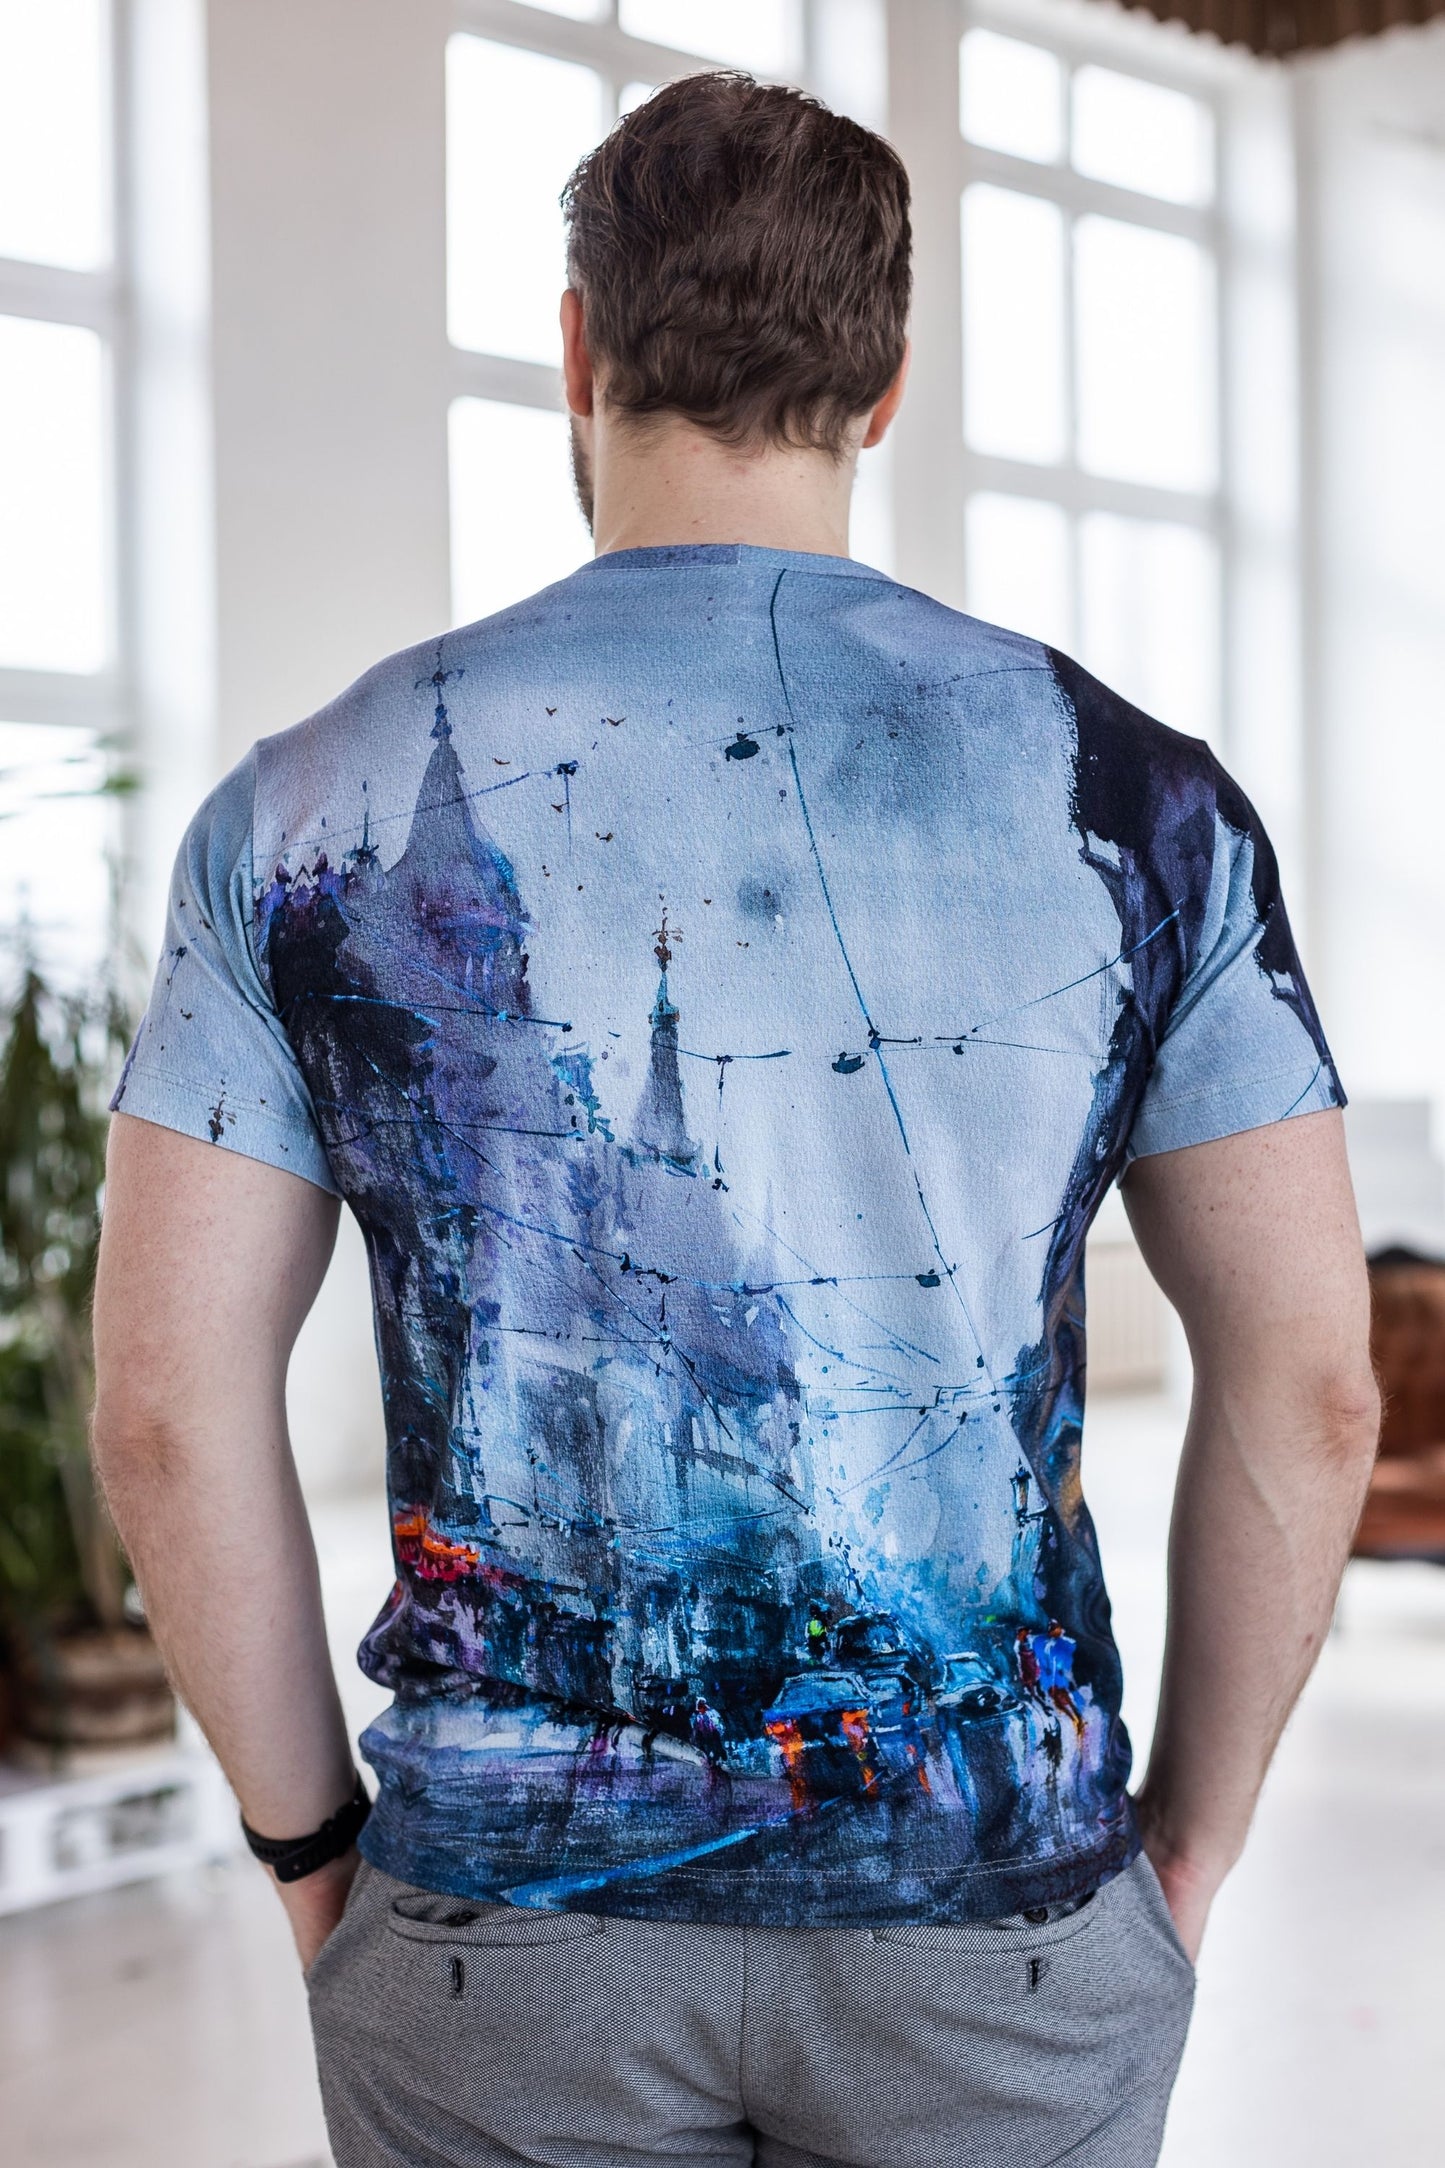 Men's T-shirt with views of Riga 2